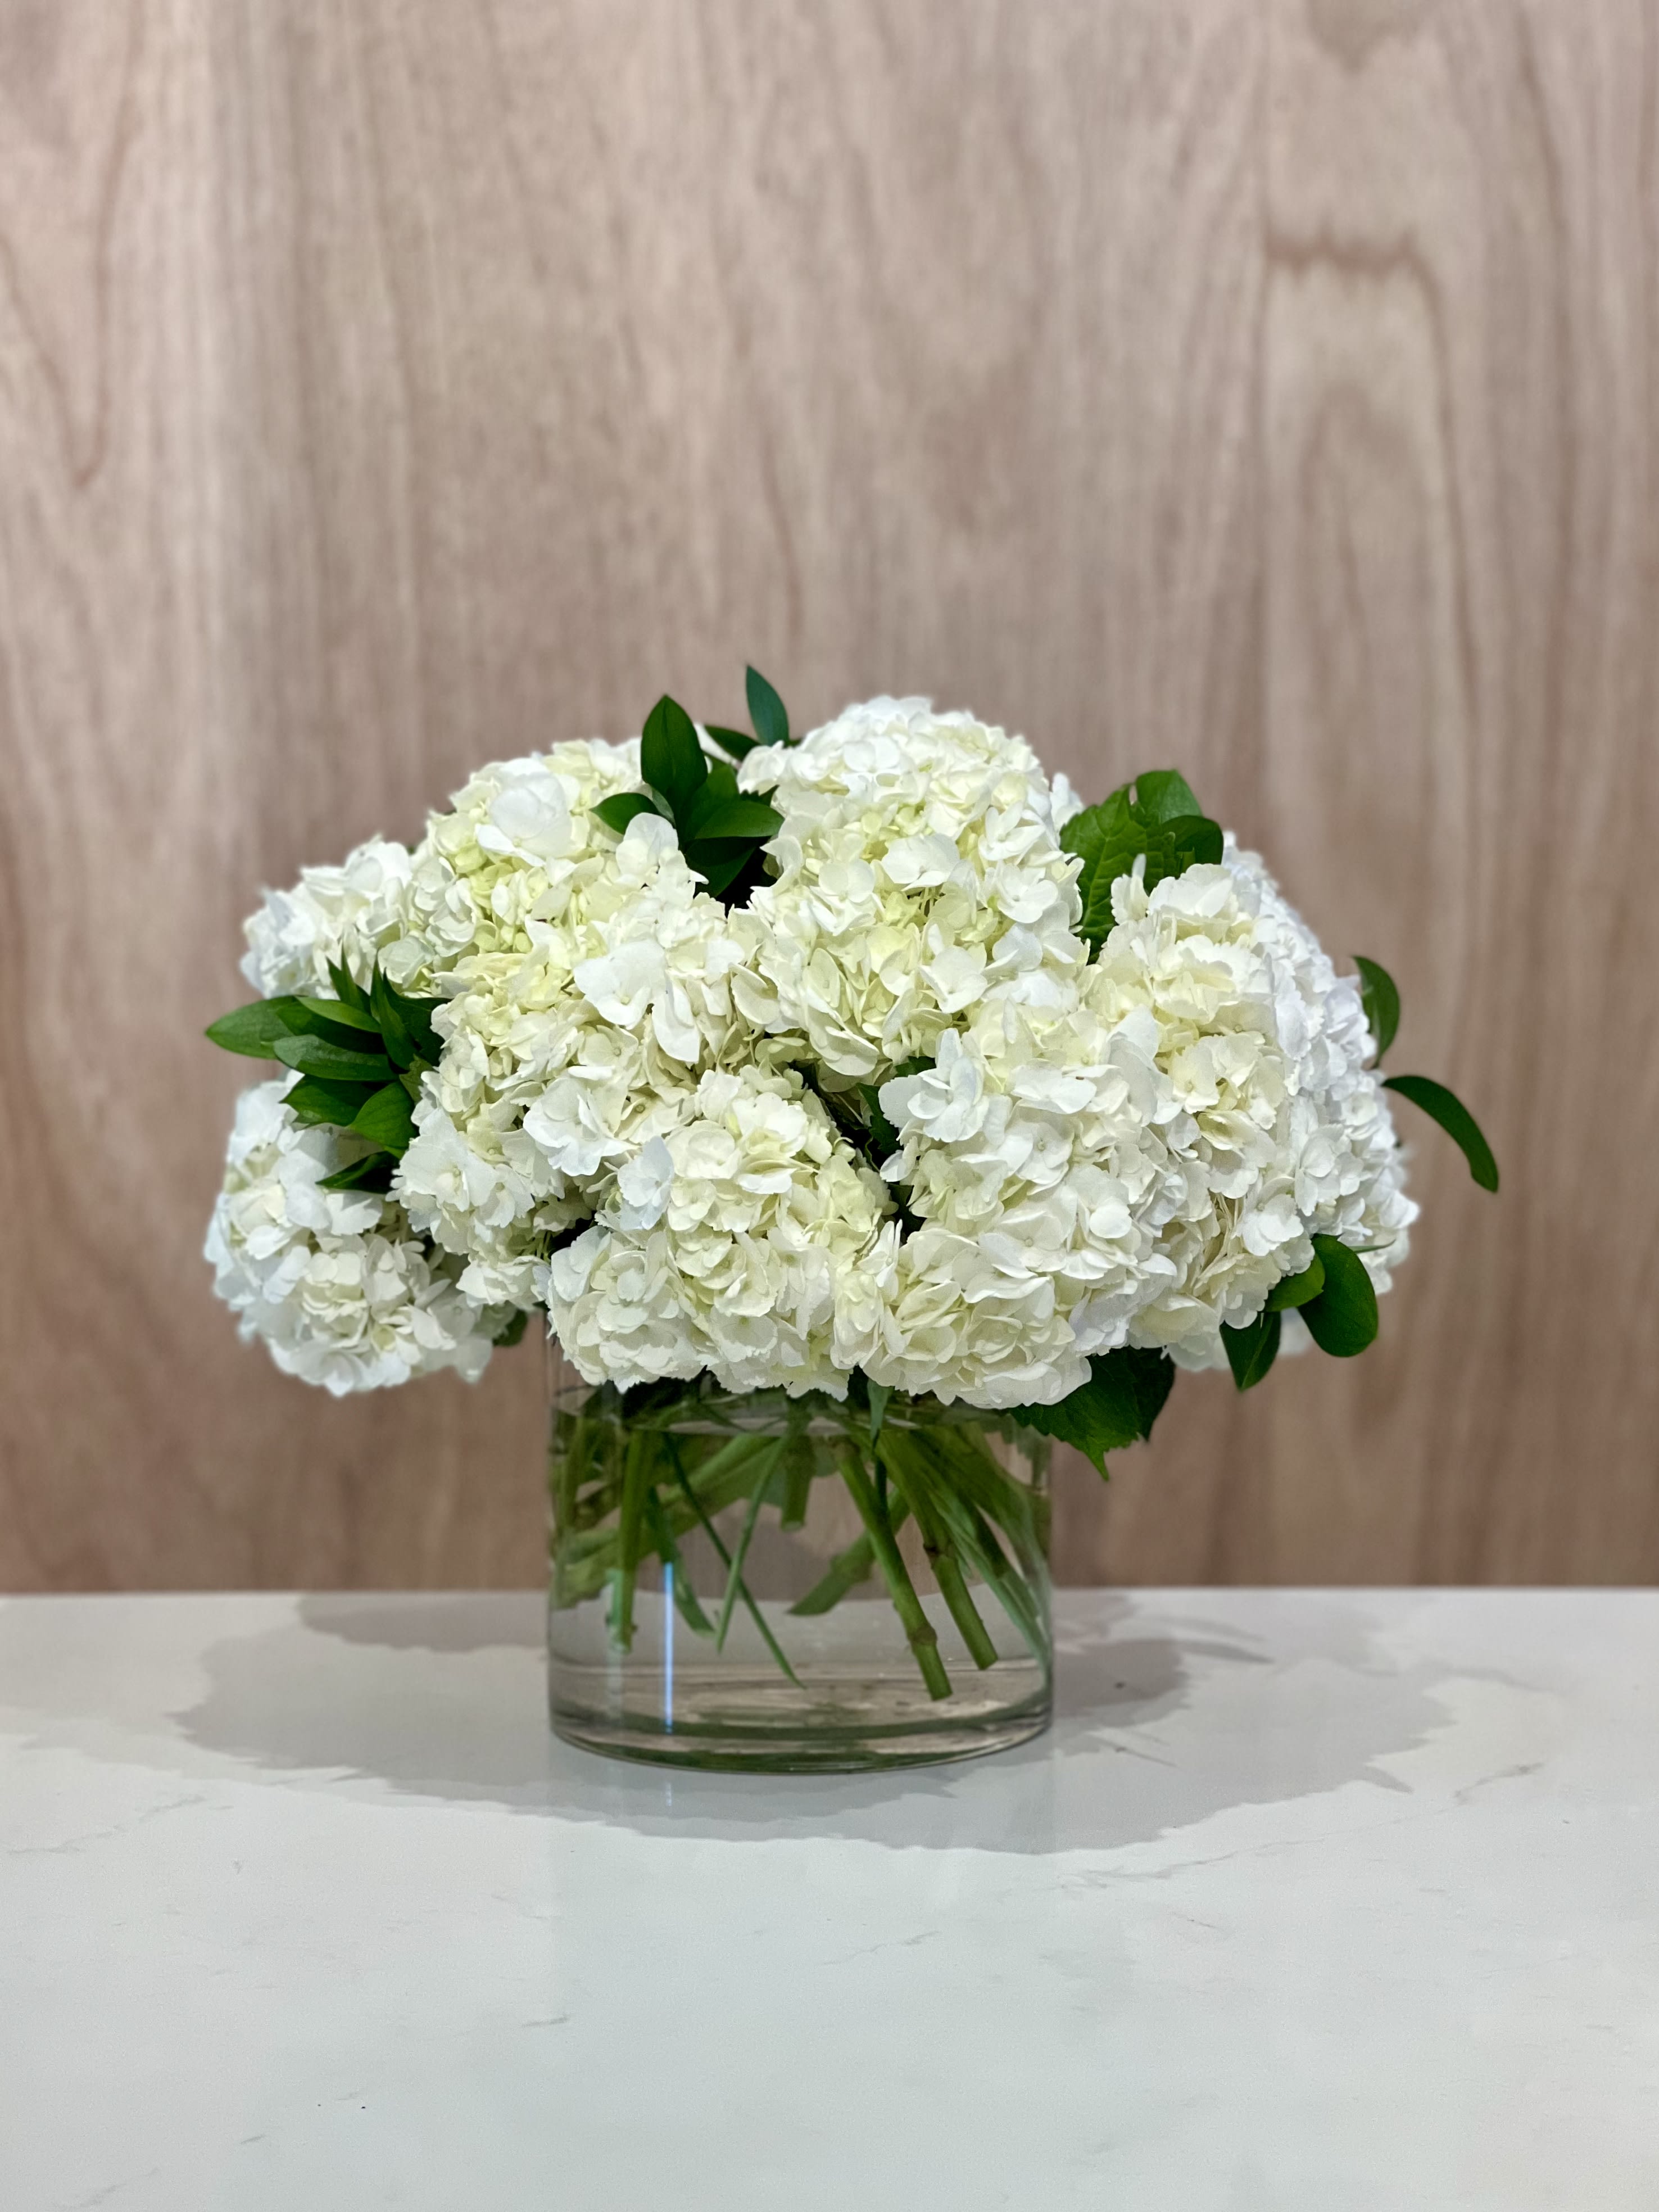 HYDRANGEA ARRANGEMENT - Embodying timeless sophistication, this exquisite design features a cluster of hydrangeas, carefully curated in varying sizes and hues. Nestled within an elegant glass vase, the arrangement exudes a refined and classic aesthetic.